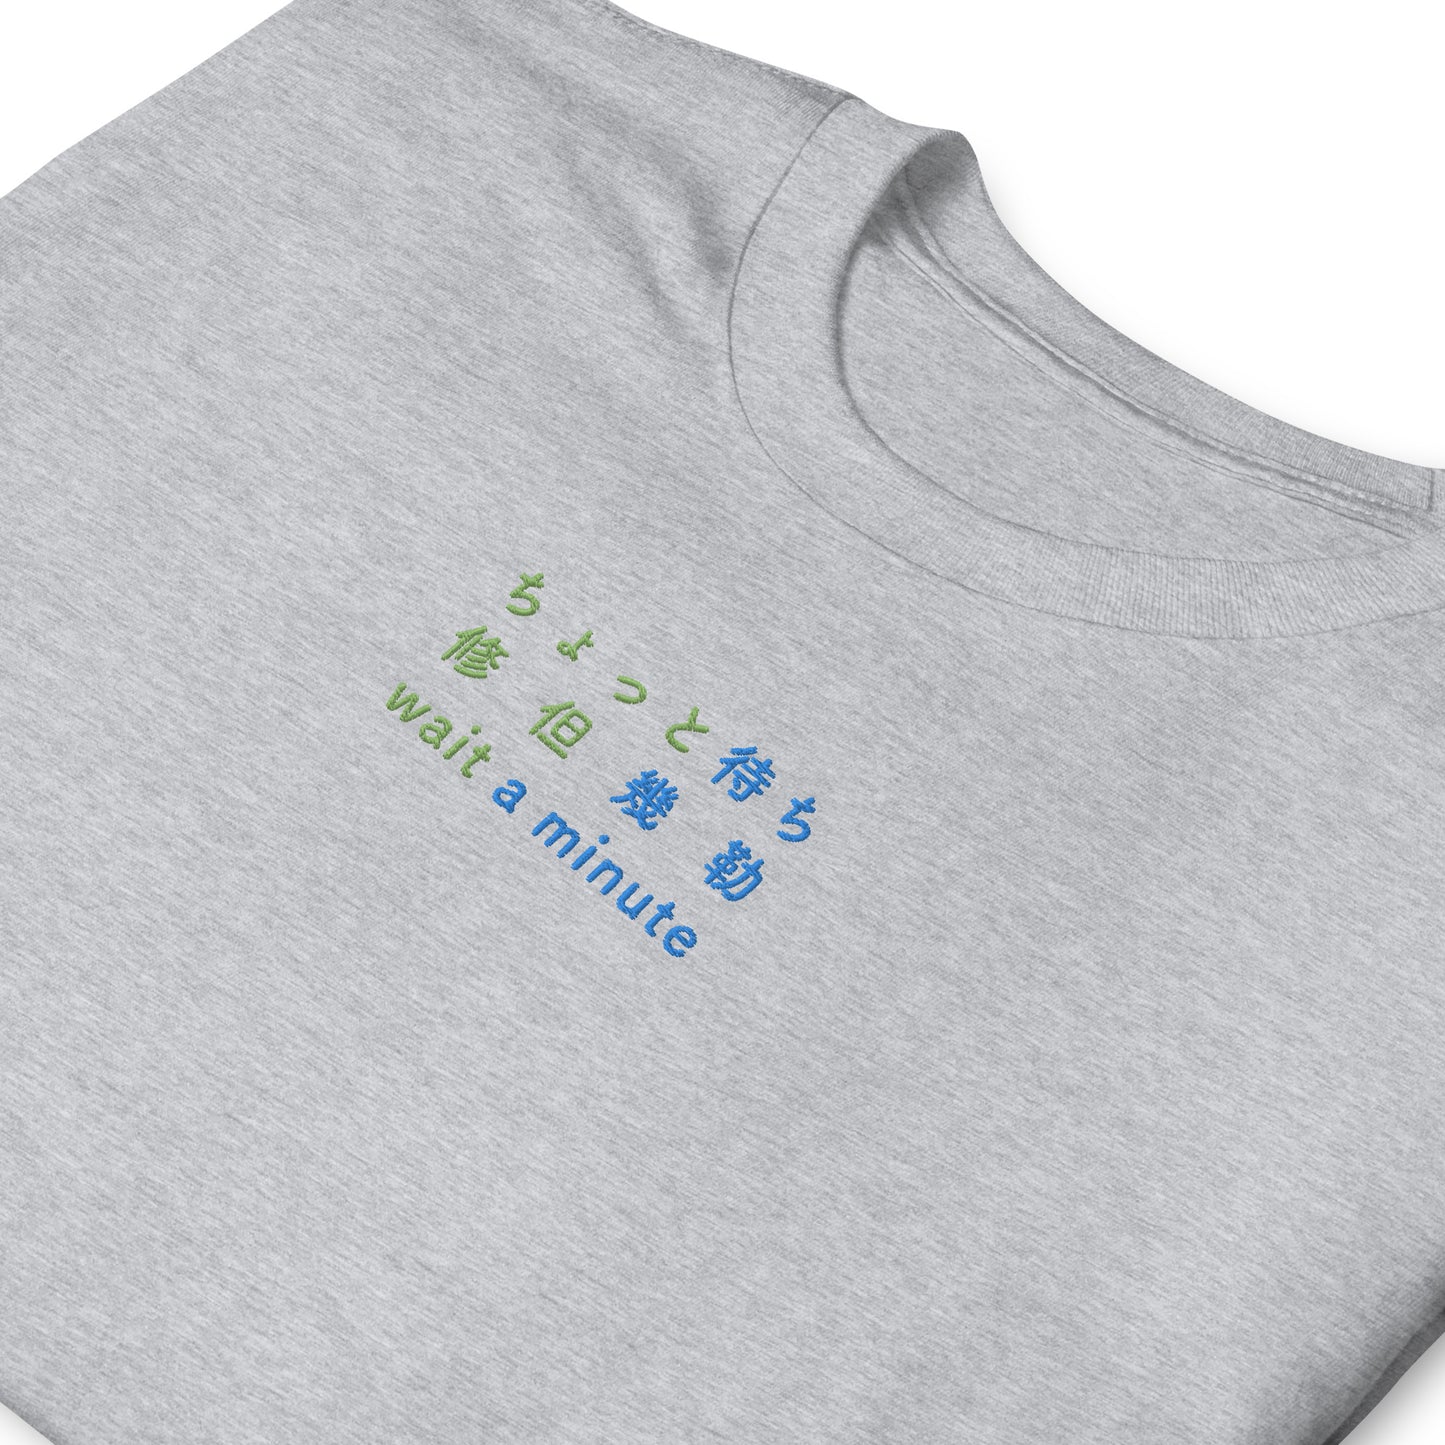 Light Gray High Quality Tee - Front Design with an Green, Blue Embroidery "Wait A Minute" in Japanese,Chinese and English Edit alt text